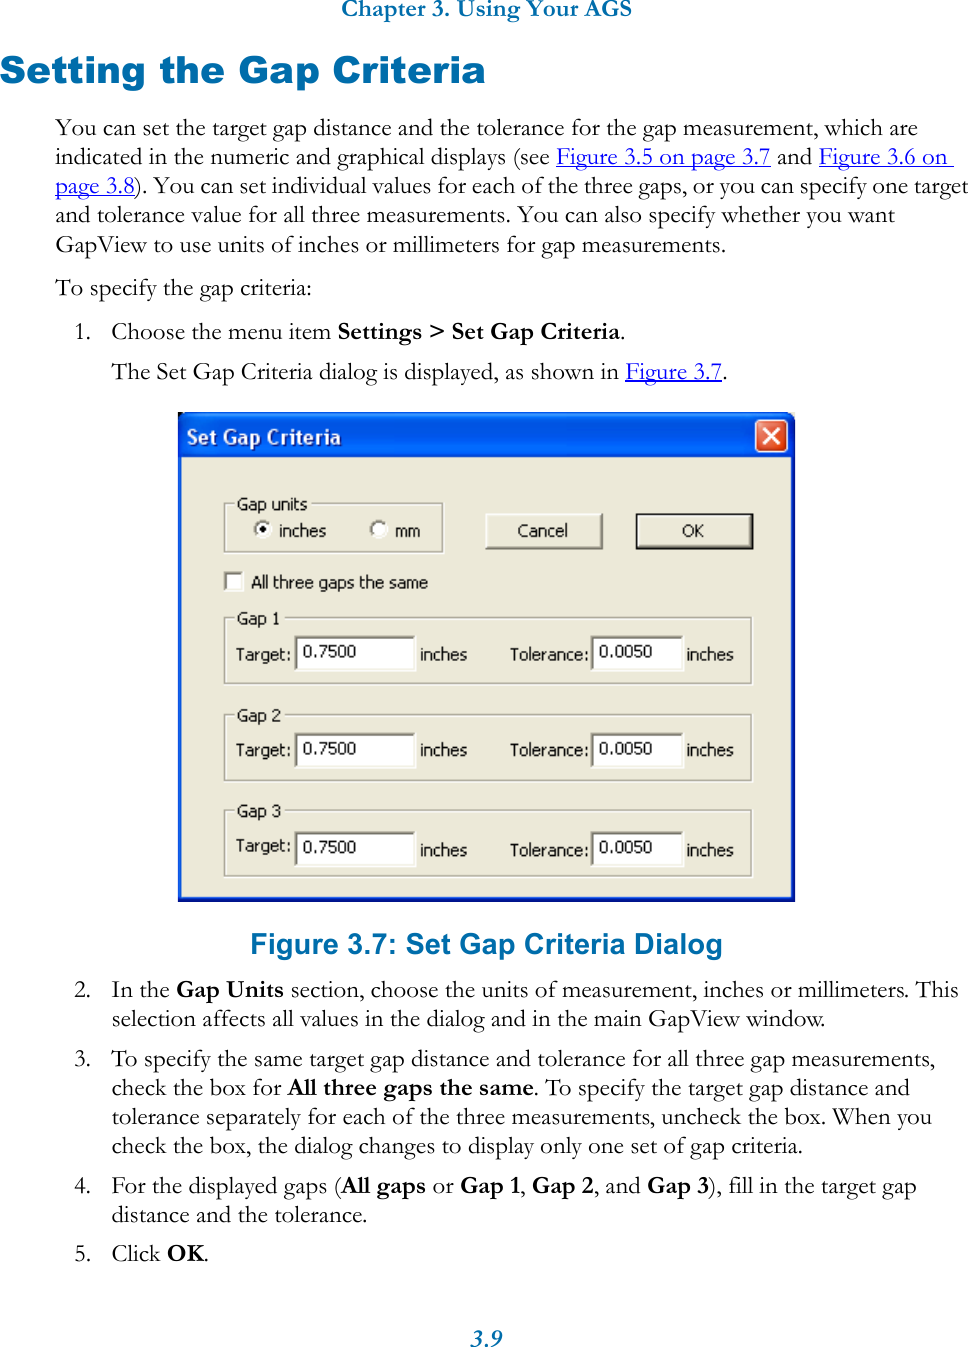 Chapter 3. Using Your AGS3.9Setting the Gap CriteriaYou can set the target gap distance and the tolerance for the gap measurement, which are indicated in the numeric and graphical displays (see Figure 3.5 on page 3.7 and Figure 3.6 on page 3.8). You can set individual values for each of the three gaps, or you can specify one target and tolerance value for all three measurements. You can also specify whether you want GapView to use units of inches or millimeters for gap measurements.To specify the gap criteria:1. Choose the menu item Settings &gt; Set Gap Criteria.The Set Gap Criteria dialog is displayed, as shown in Figure 3.7.Figure 3.7: Set Gap Criteria Dialog2. In the Gap Units section, choose the units of measurement, inches or millimeters. This selection affects all values in the dialog and in the main GapView window.3. To specify the same target gap distance and tolerance for all three gap measurements, check the box for All three gaps the same. To specify the target gap distance and tolerance separately for each of the three measurements, uncheck the box. When you check the box, the dialog changes to display only one set of gap criteria.4. For the displayed gaps (All gaps or Gap 1, Gap 2, and Gap 3), fill in the target gap distance and the tolerance.5. Click OK.